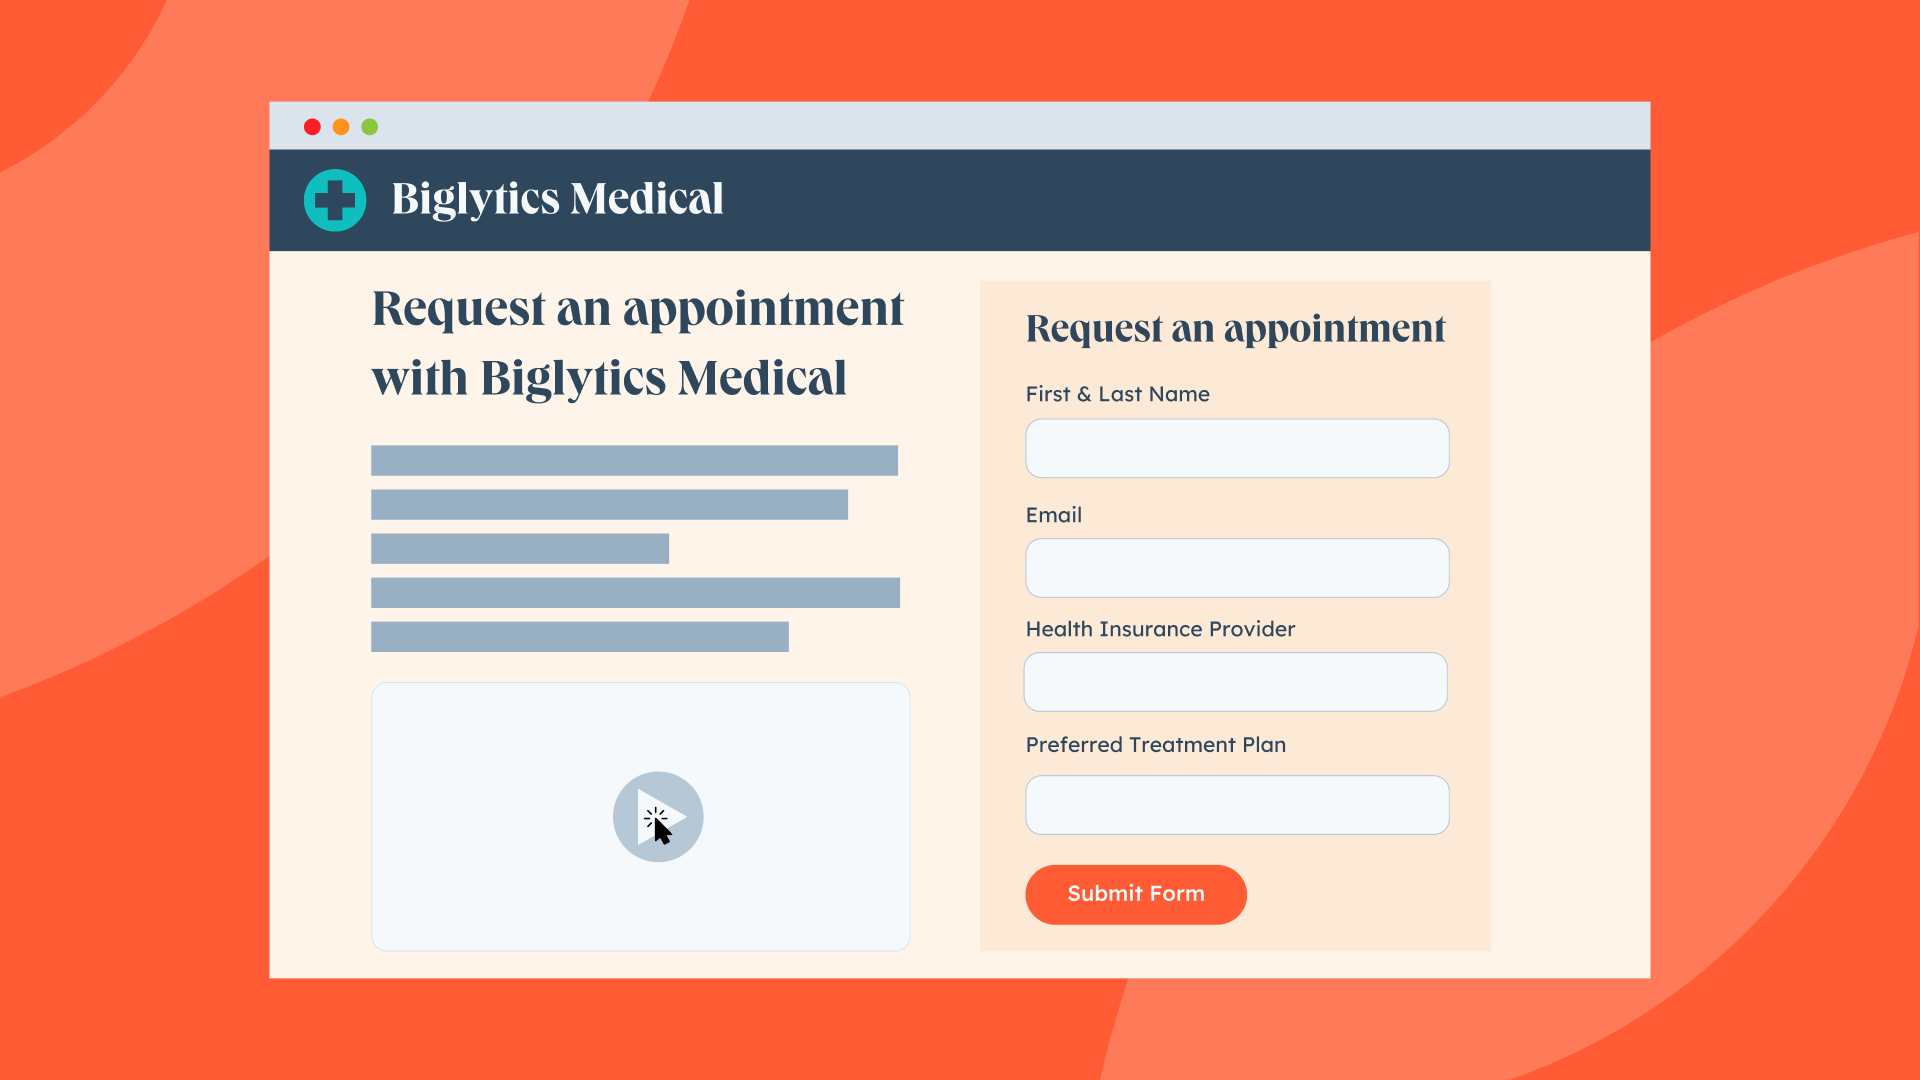 HubSpot announces HIPAA support and new sensitive data tools